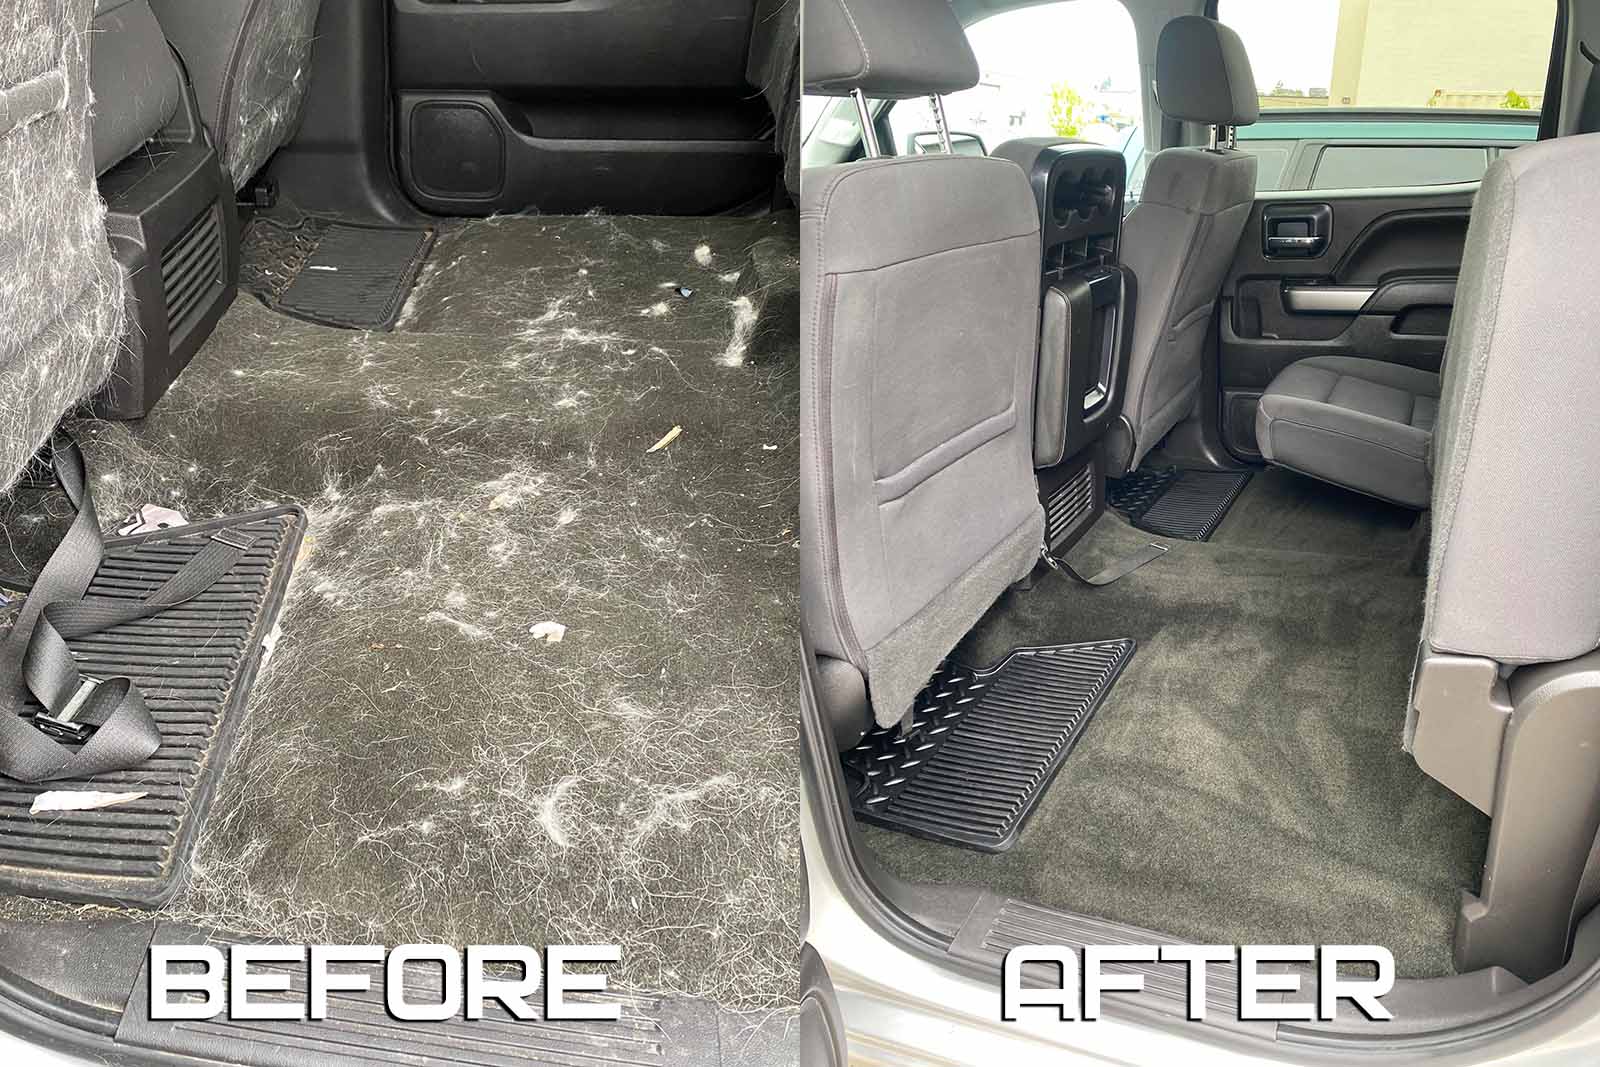 extremely messy car carpeting with dog hair - before and after Calgary car detailing